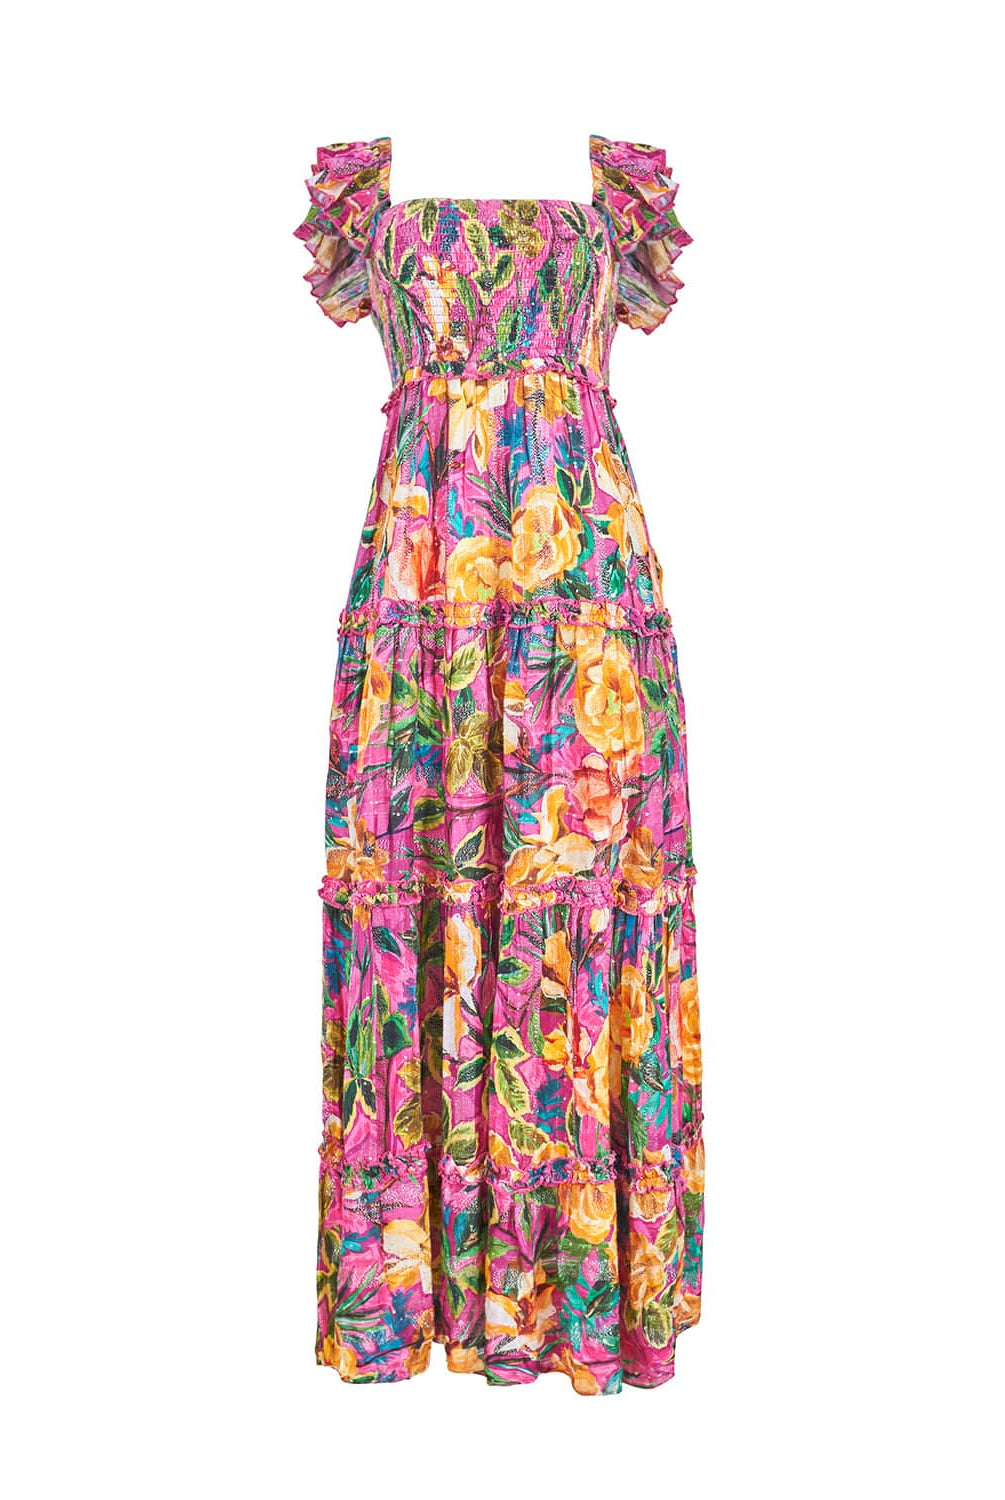 A maxi pink tropical dress with sequins. Featured against a white wall background.